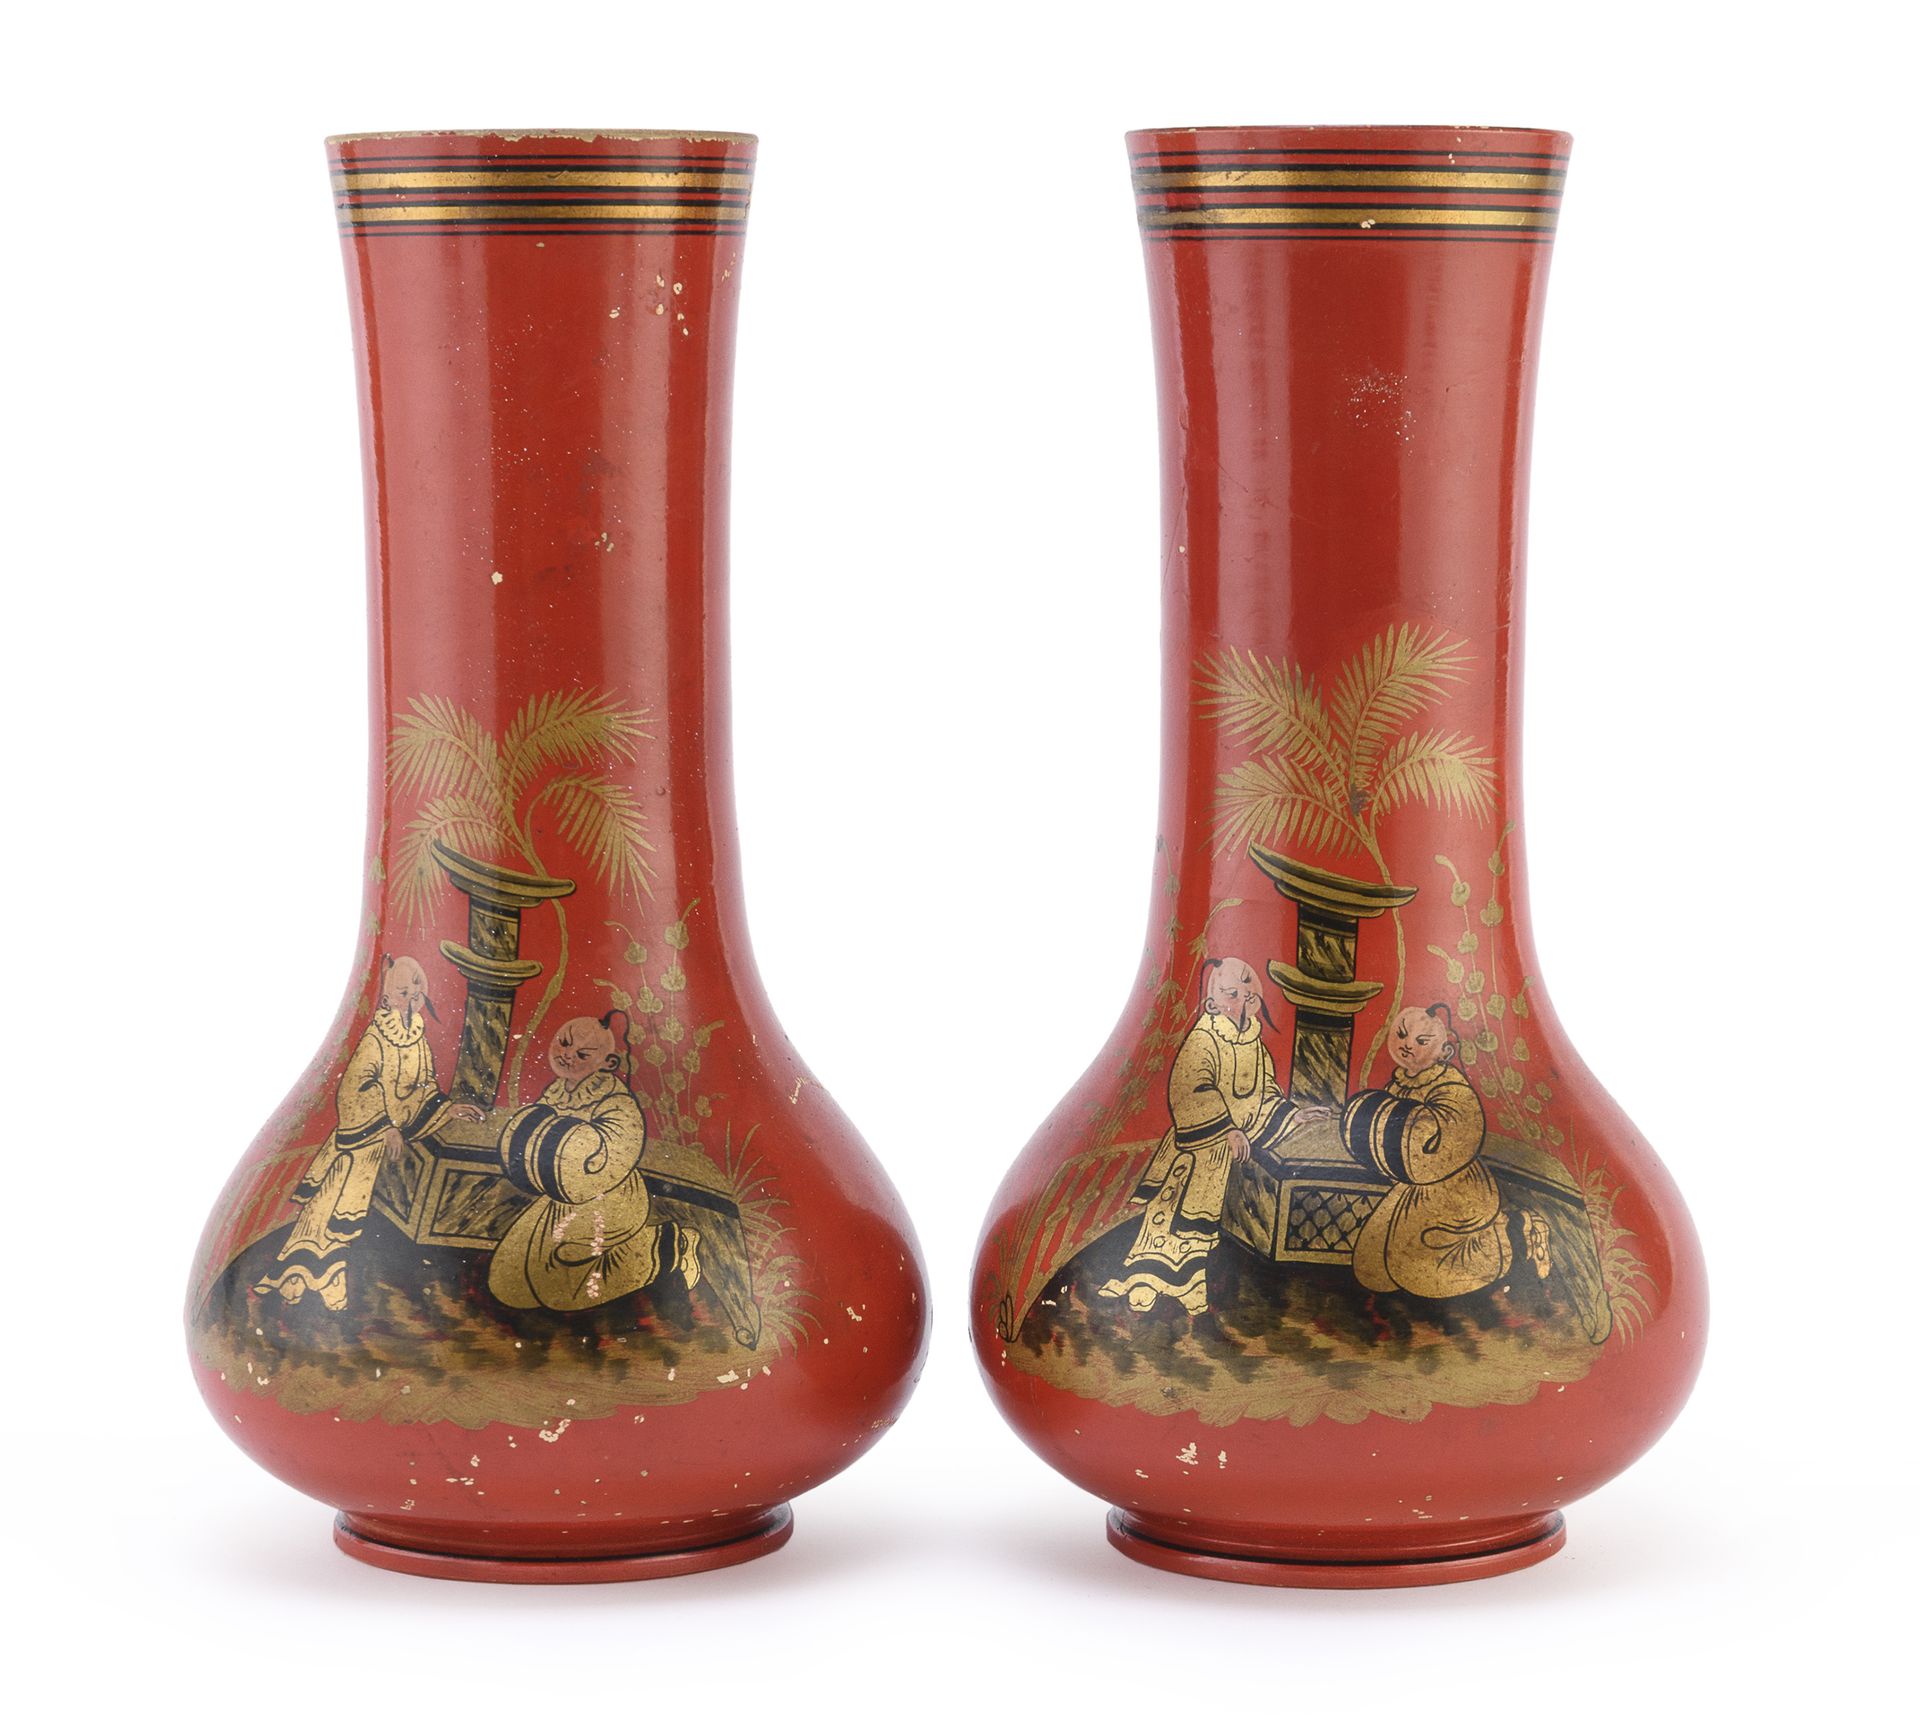 Null PAIR OF POLYCHROME PAINTED PORCELAIN VASES, FRANCE FIRST HALF 20TH CENTURY